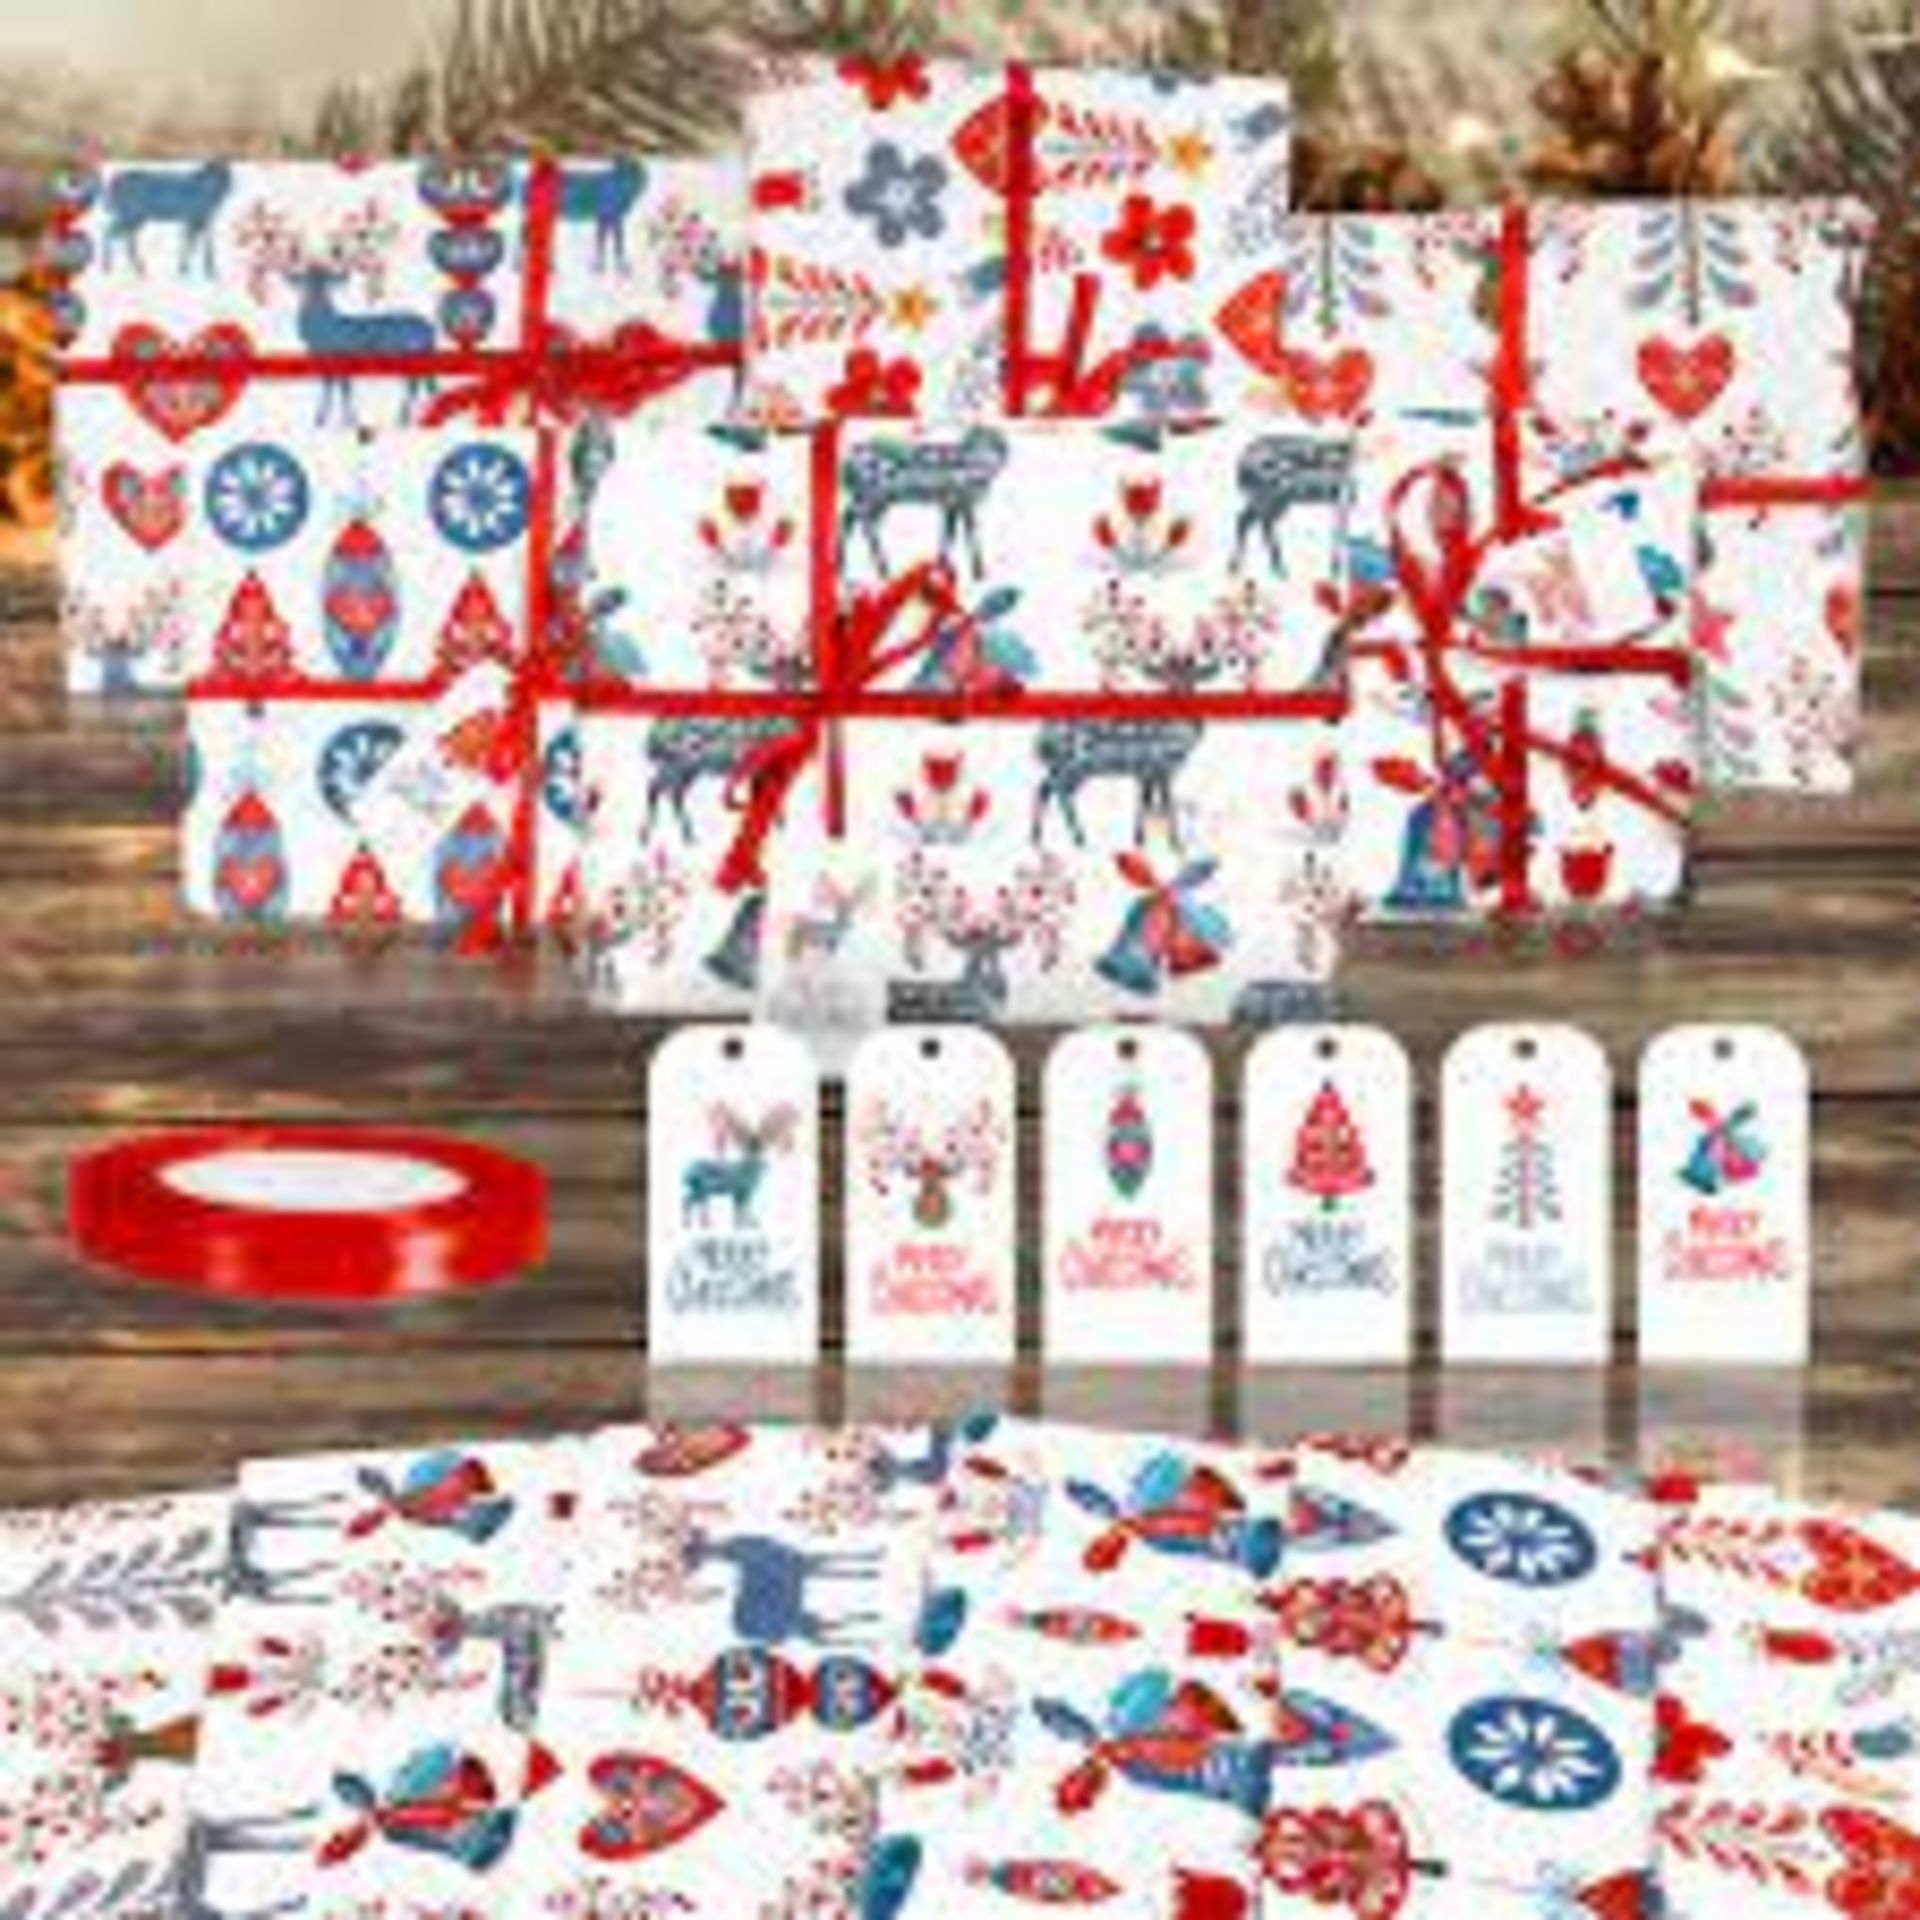 TRADE LOT 600 X BRAND NEW ASSORTED SETS OF 6 FOLDED SHEETS CHRISTMAS WRAPPING PAPER SET IN VARIOUS